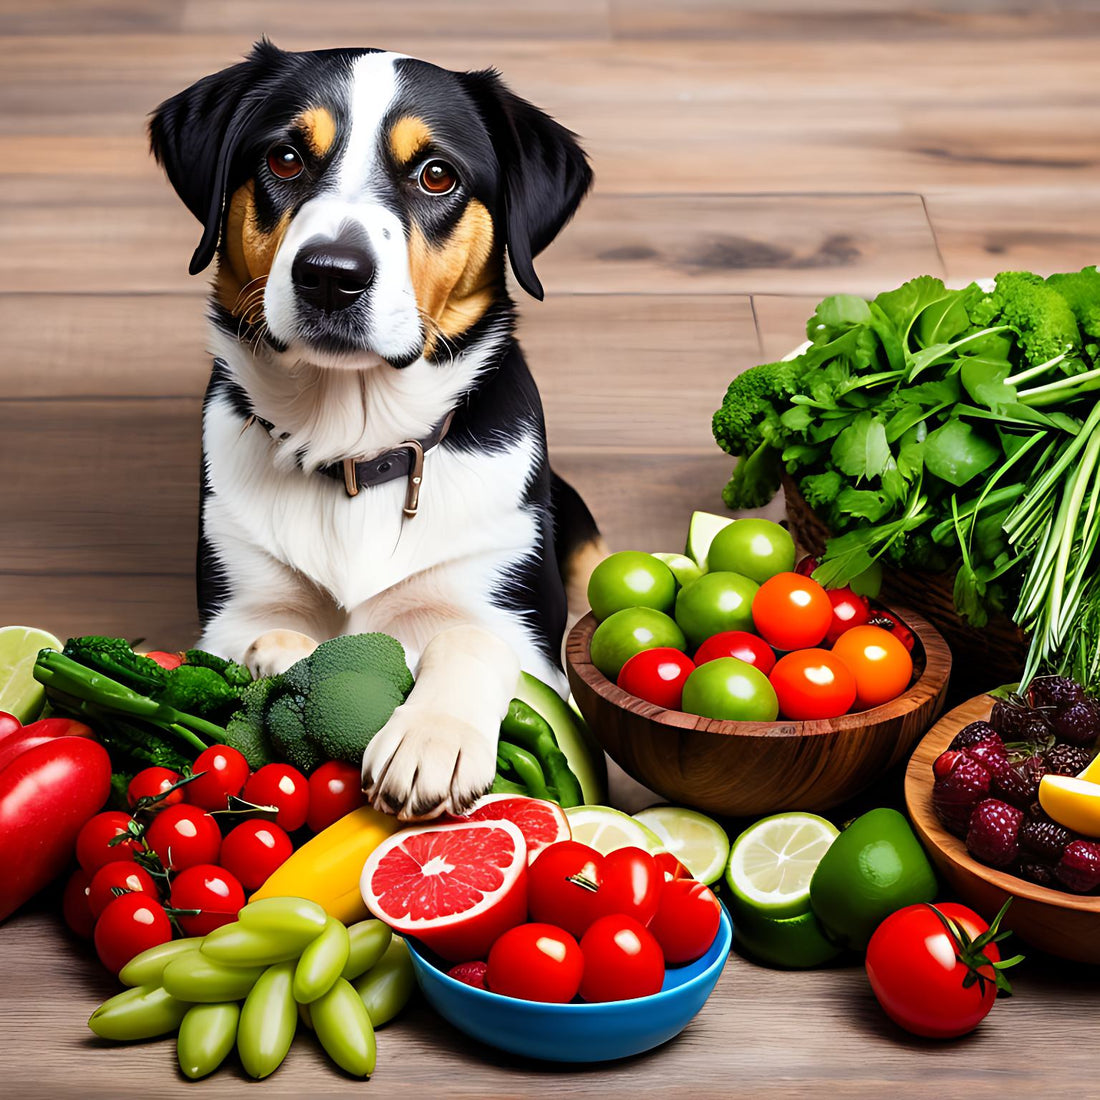 The Benefits of a Balanced Diet For Your Dog